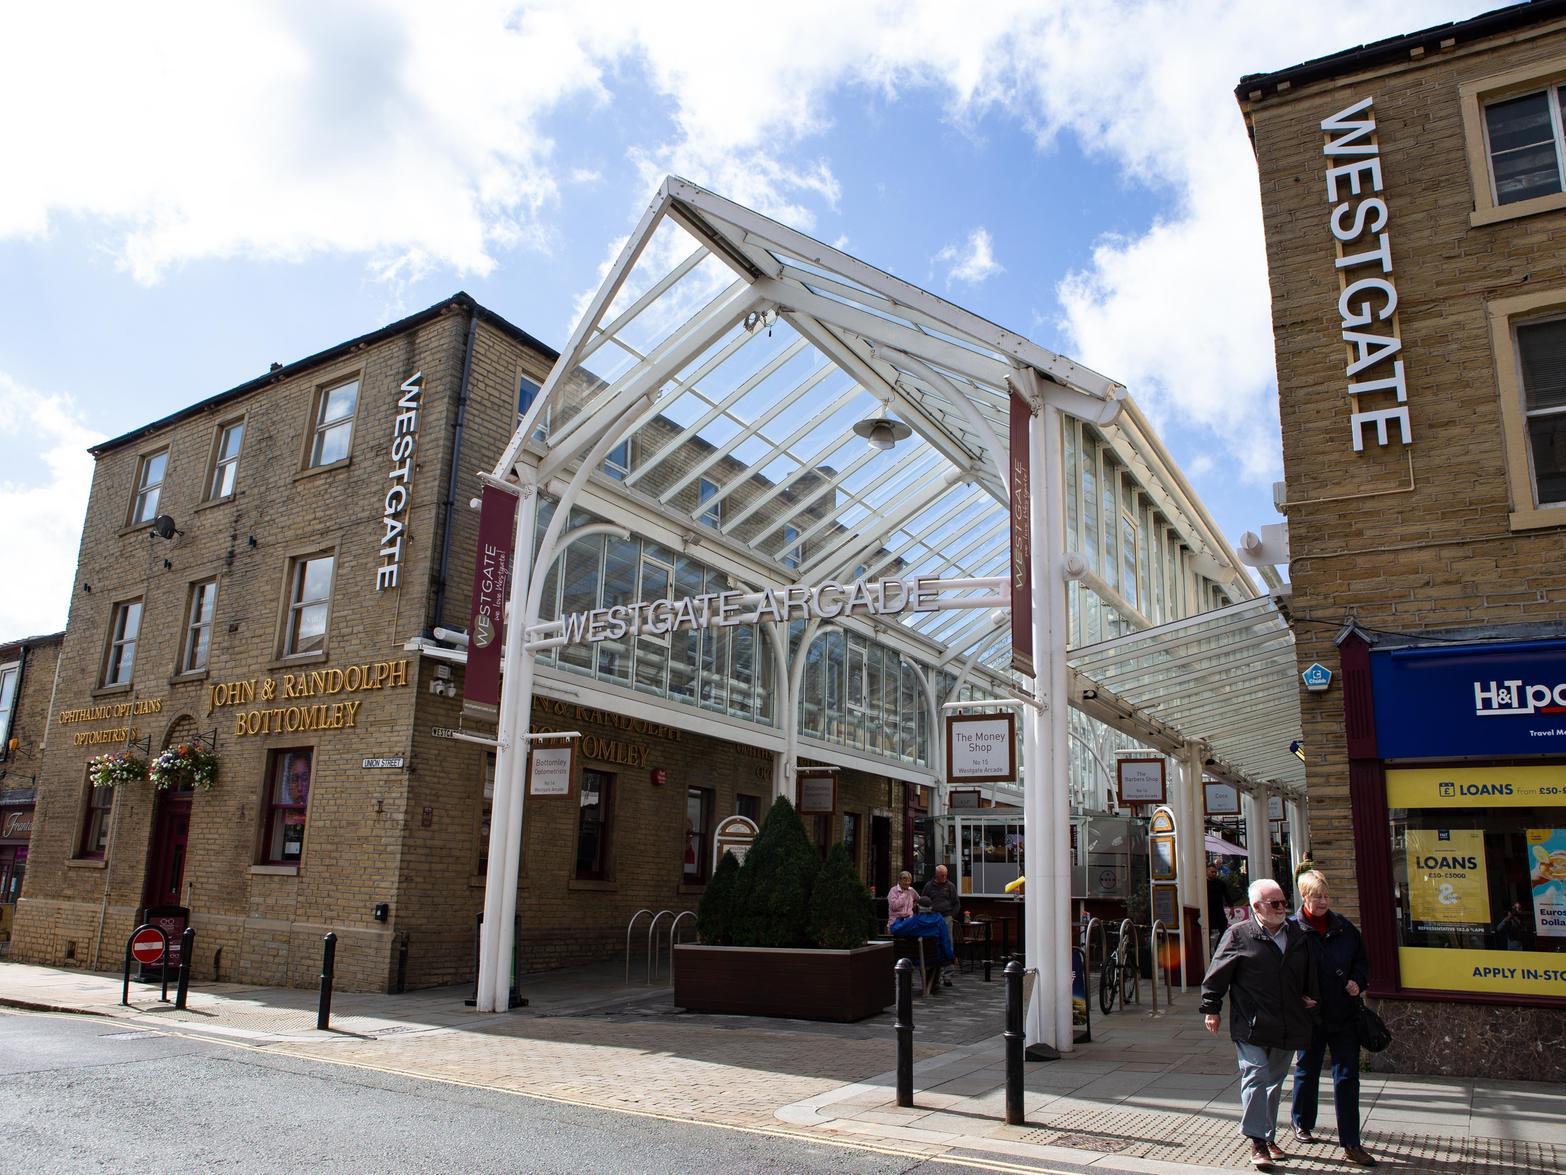 The covered Westgate Shopping Arcade was a multi million pound development project completed in 2007 that aimed to attract more independent retailers to the town centre.